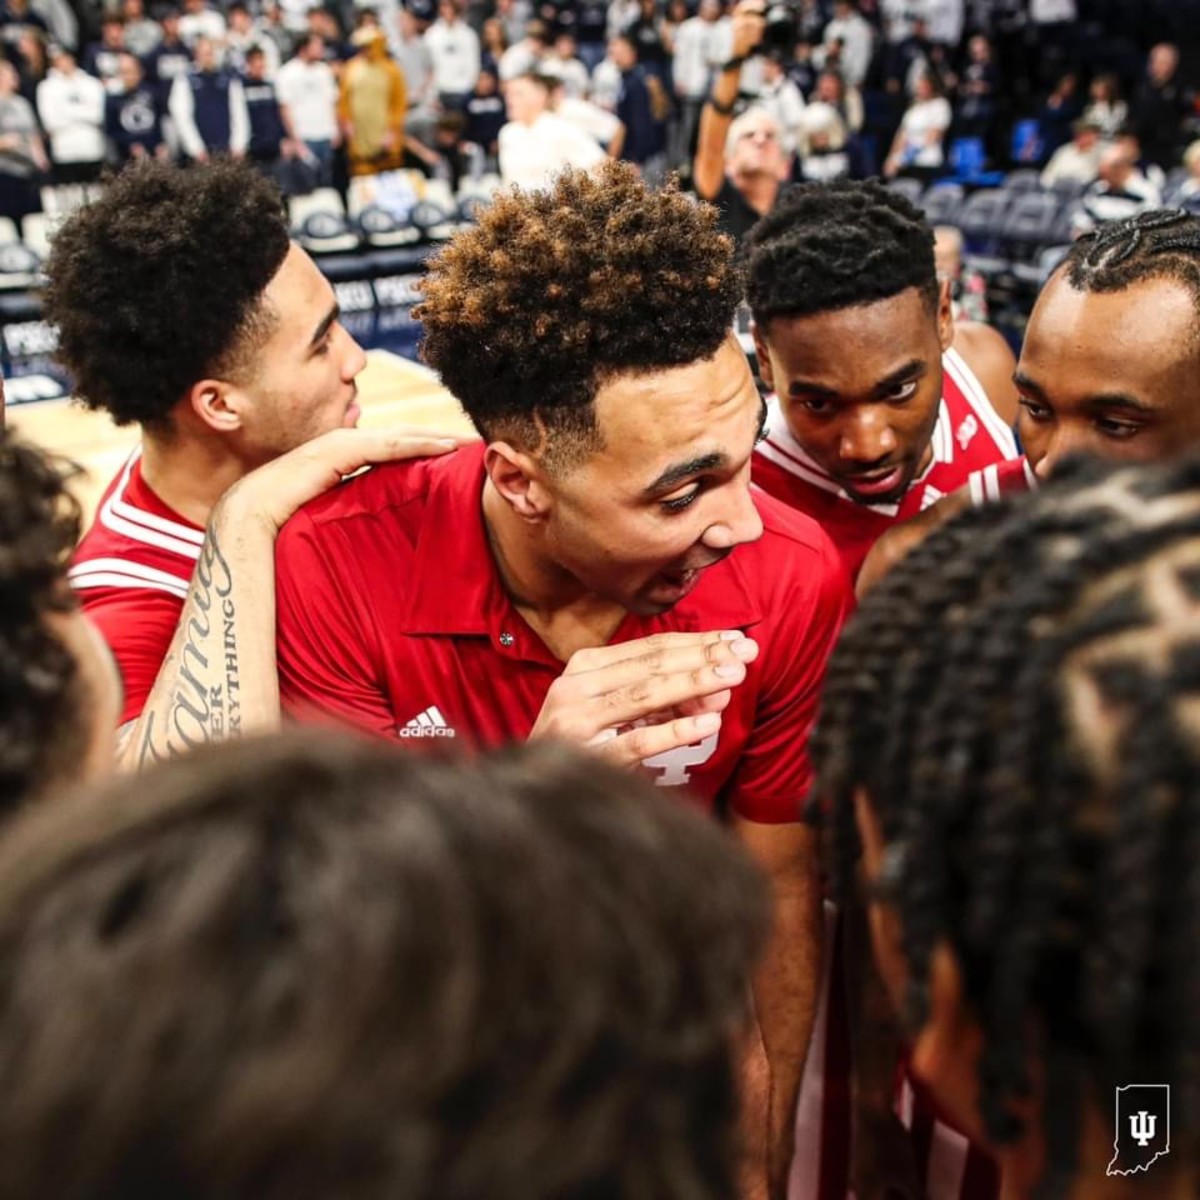 The Indiana Hoosiers huddle pregame as they get set for their game at Penn State on Wednesday.